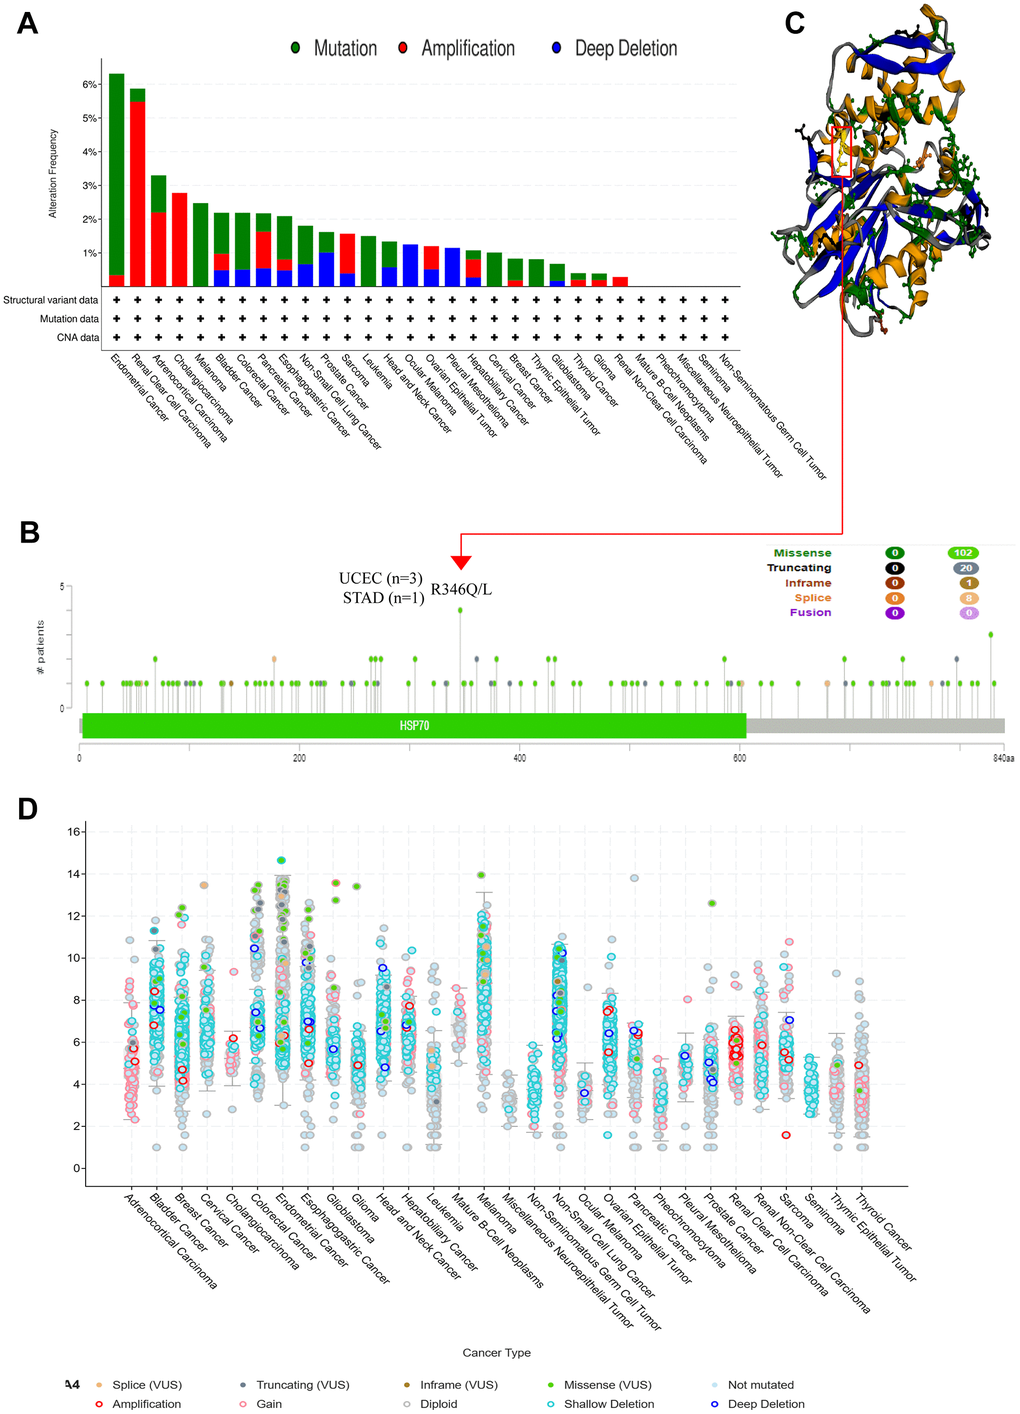 HSPA4 gene mutation and promoter methylation level in pan-cancer. cBioPortal was used to show the frequency of variation in different mutation types (A) and mutation sites (B) of HSPA4 in pan-cancer. (C) R346Q/L mutation site in the 3D protein structure of HSPA4. (D) Mutation counts and types of HSPA4 in 30 cancers.